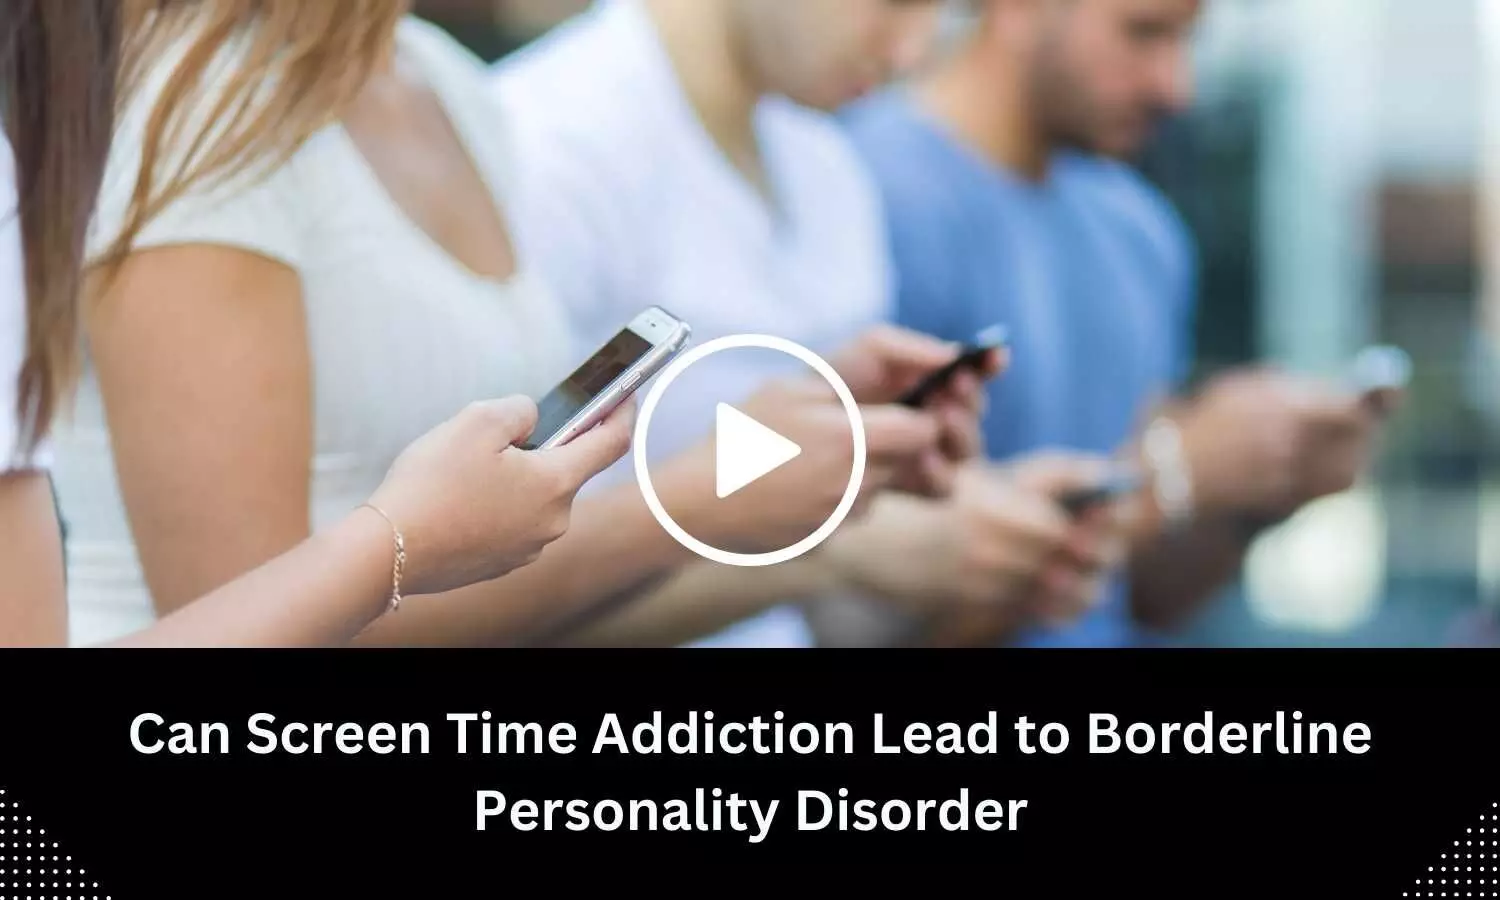 Can screen time addiction lead to borderline personality disorder?